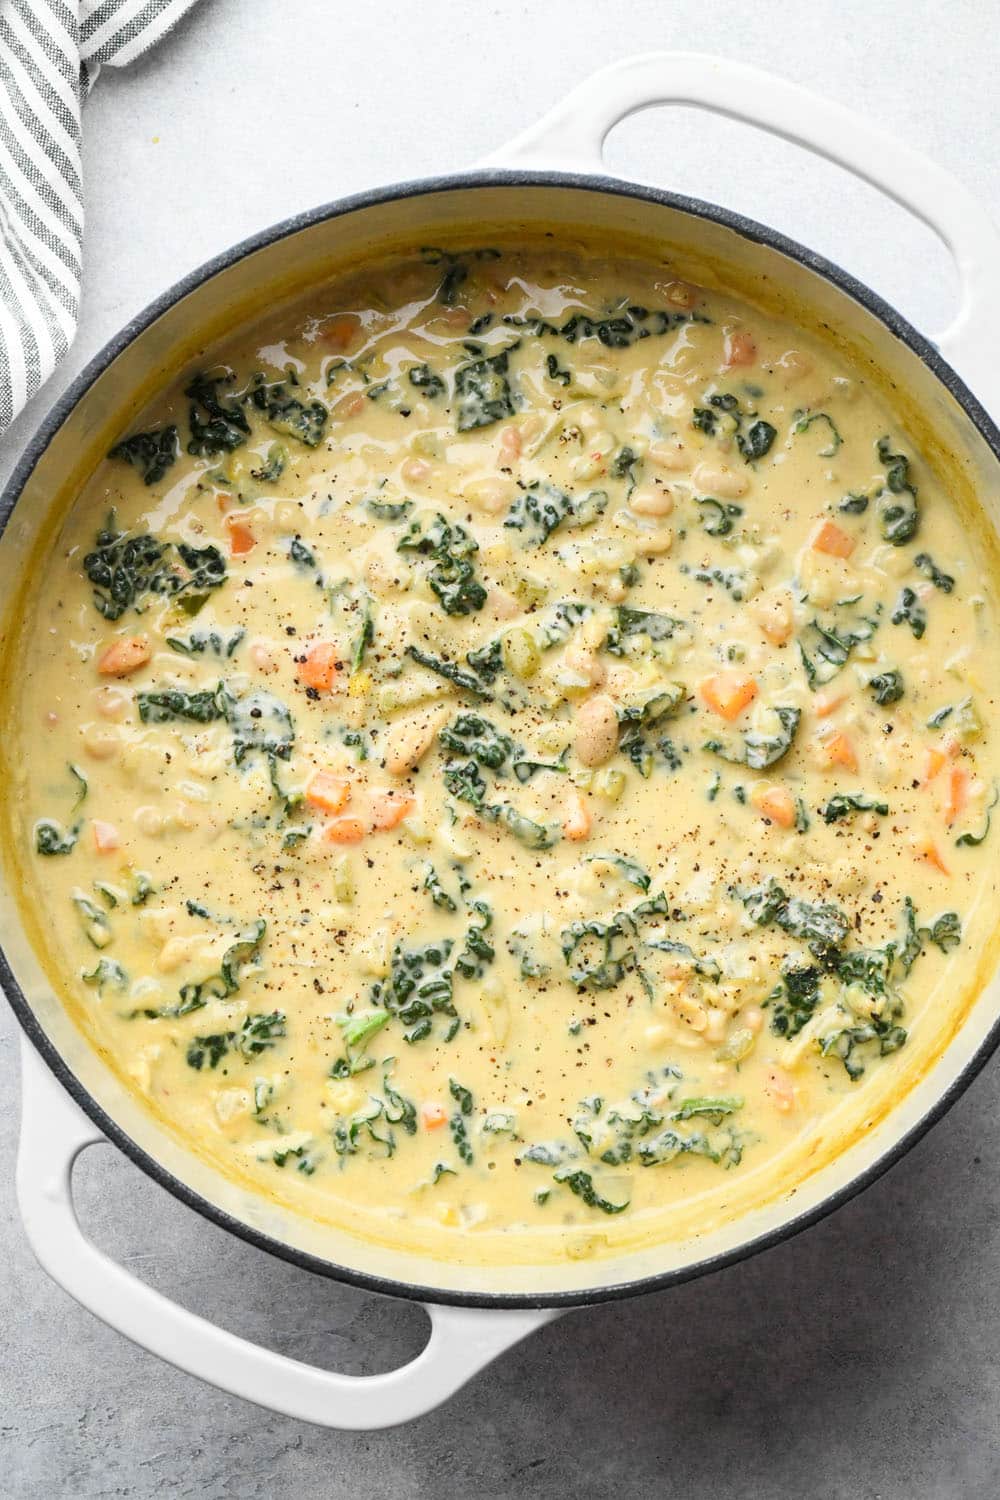 How to make White Bean and Kale Soup: Soup simmered and kale wilted.